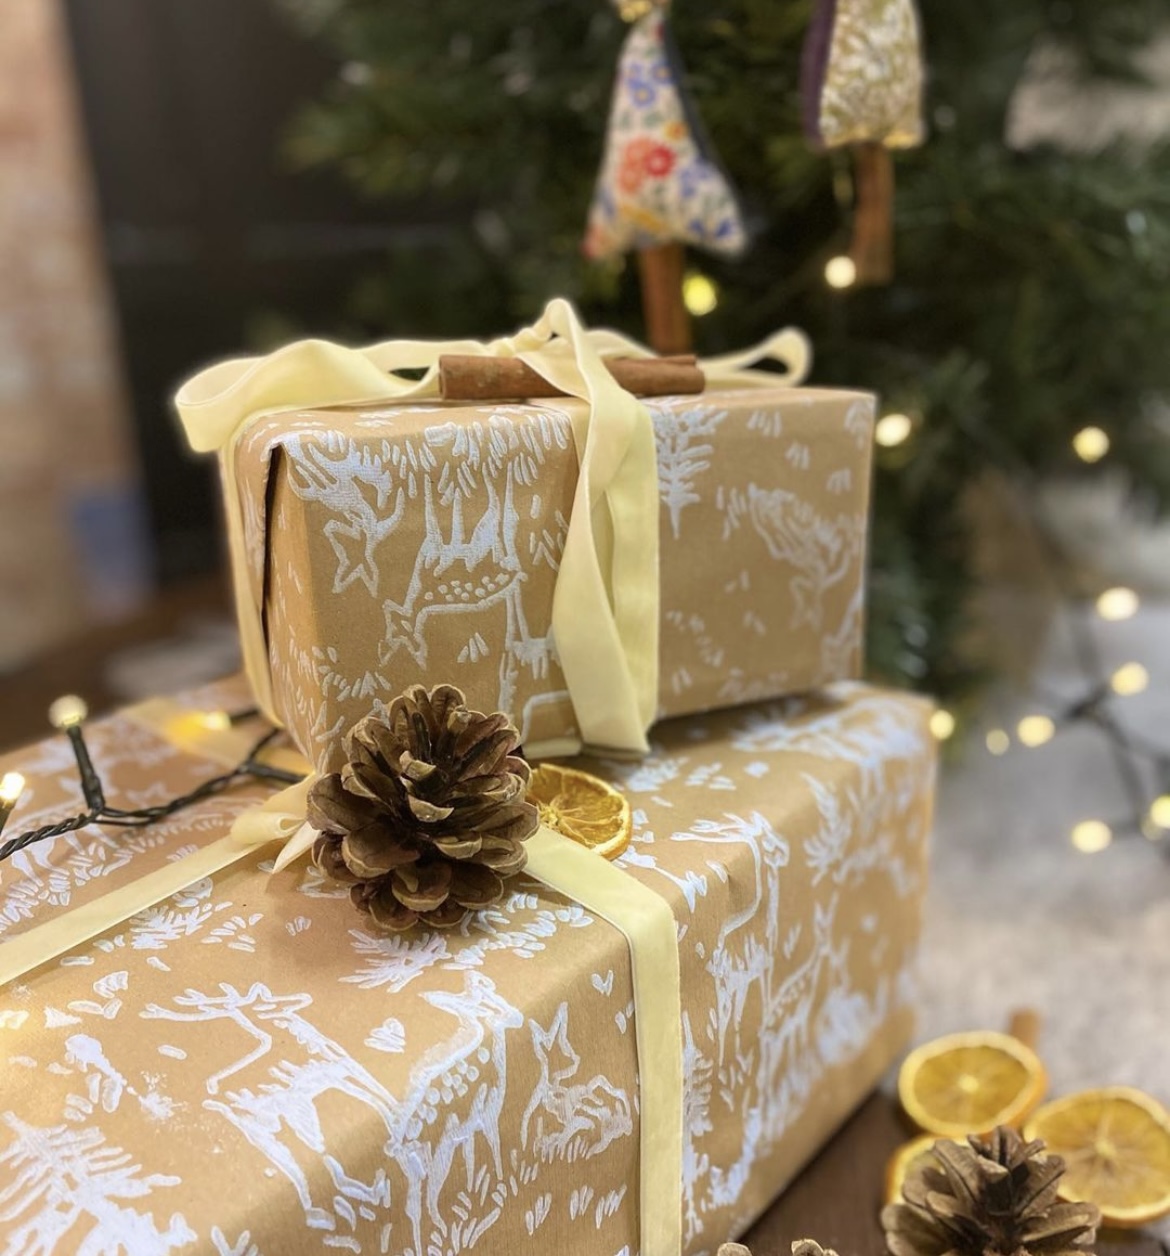 GTG Workshop: Festive and fierce present wrapping!